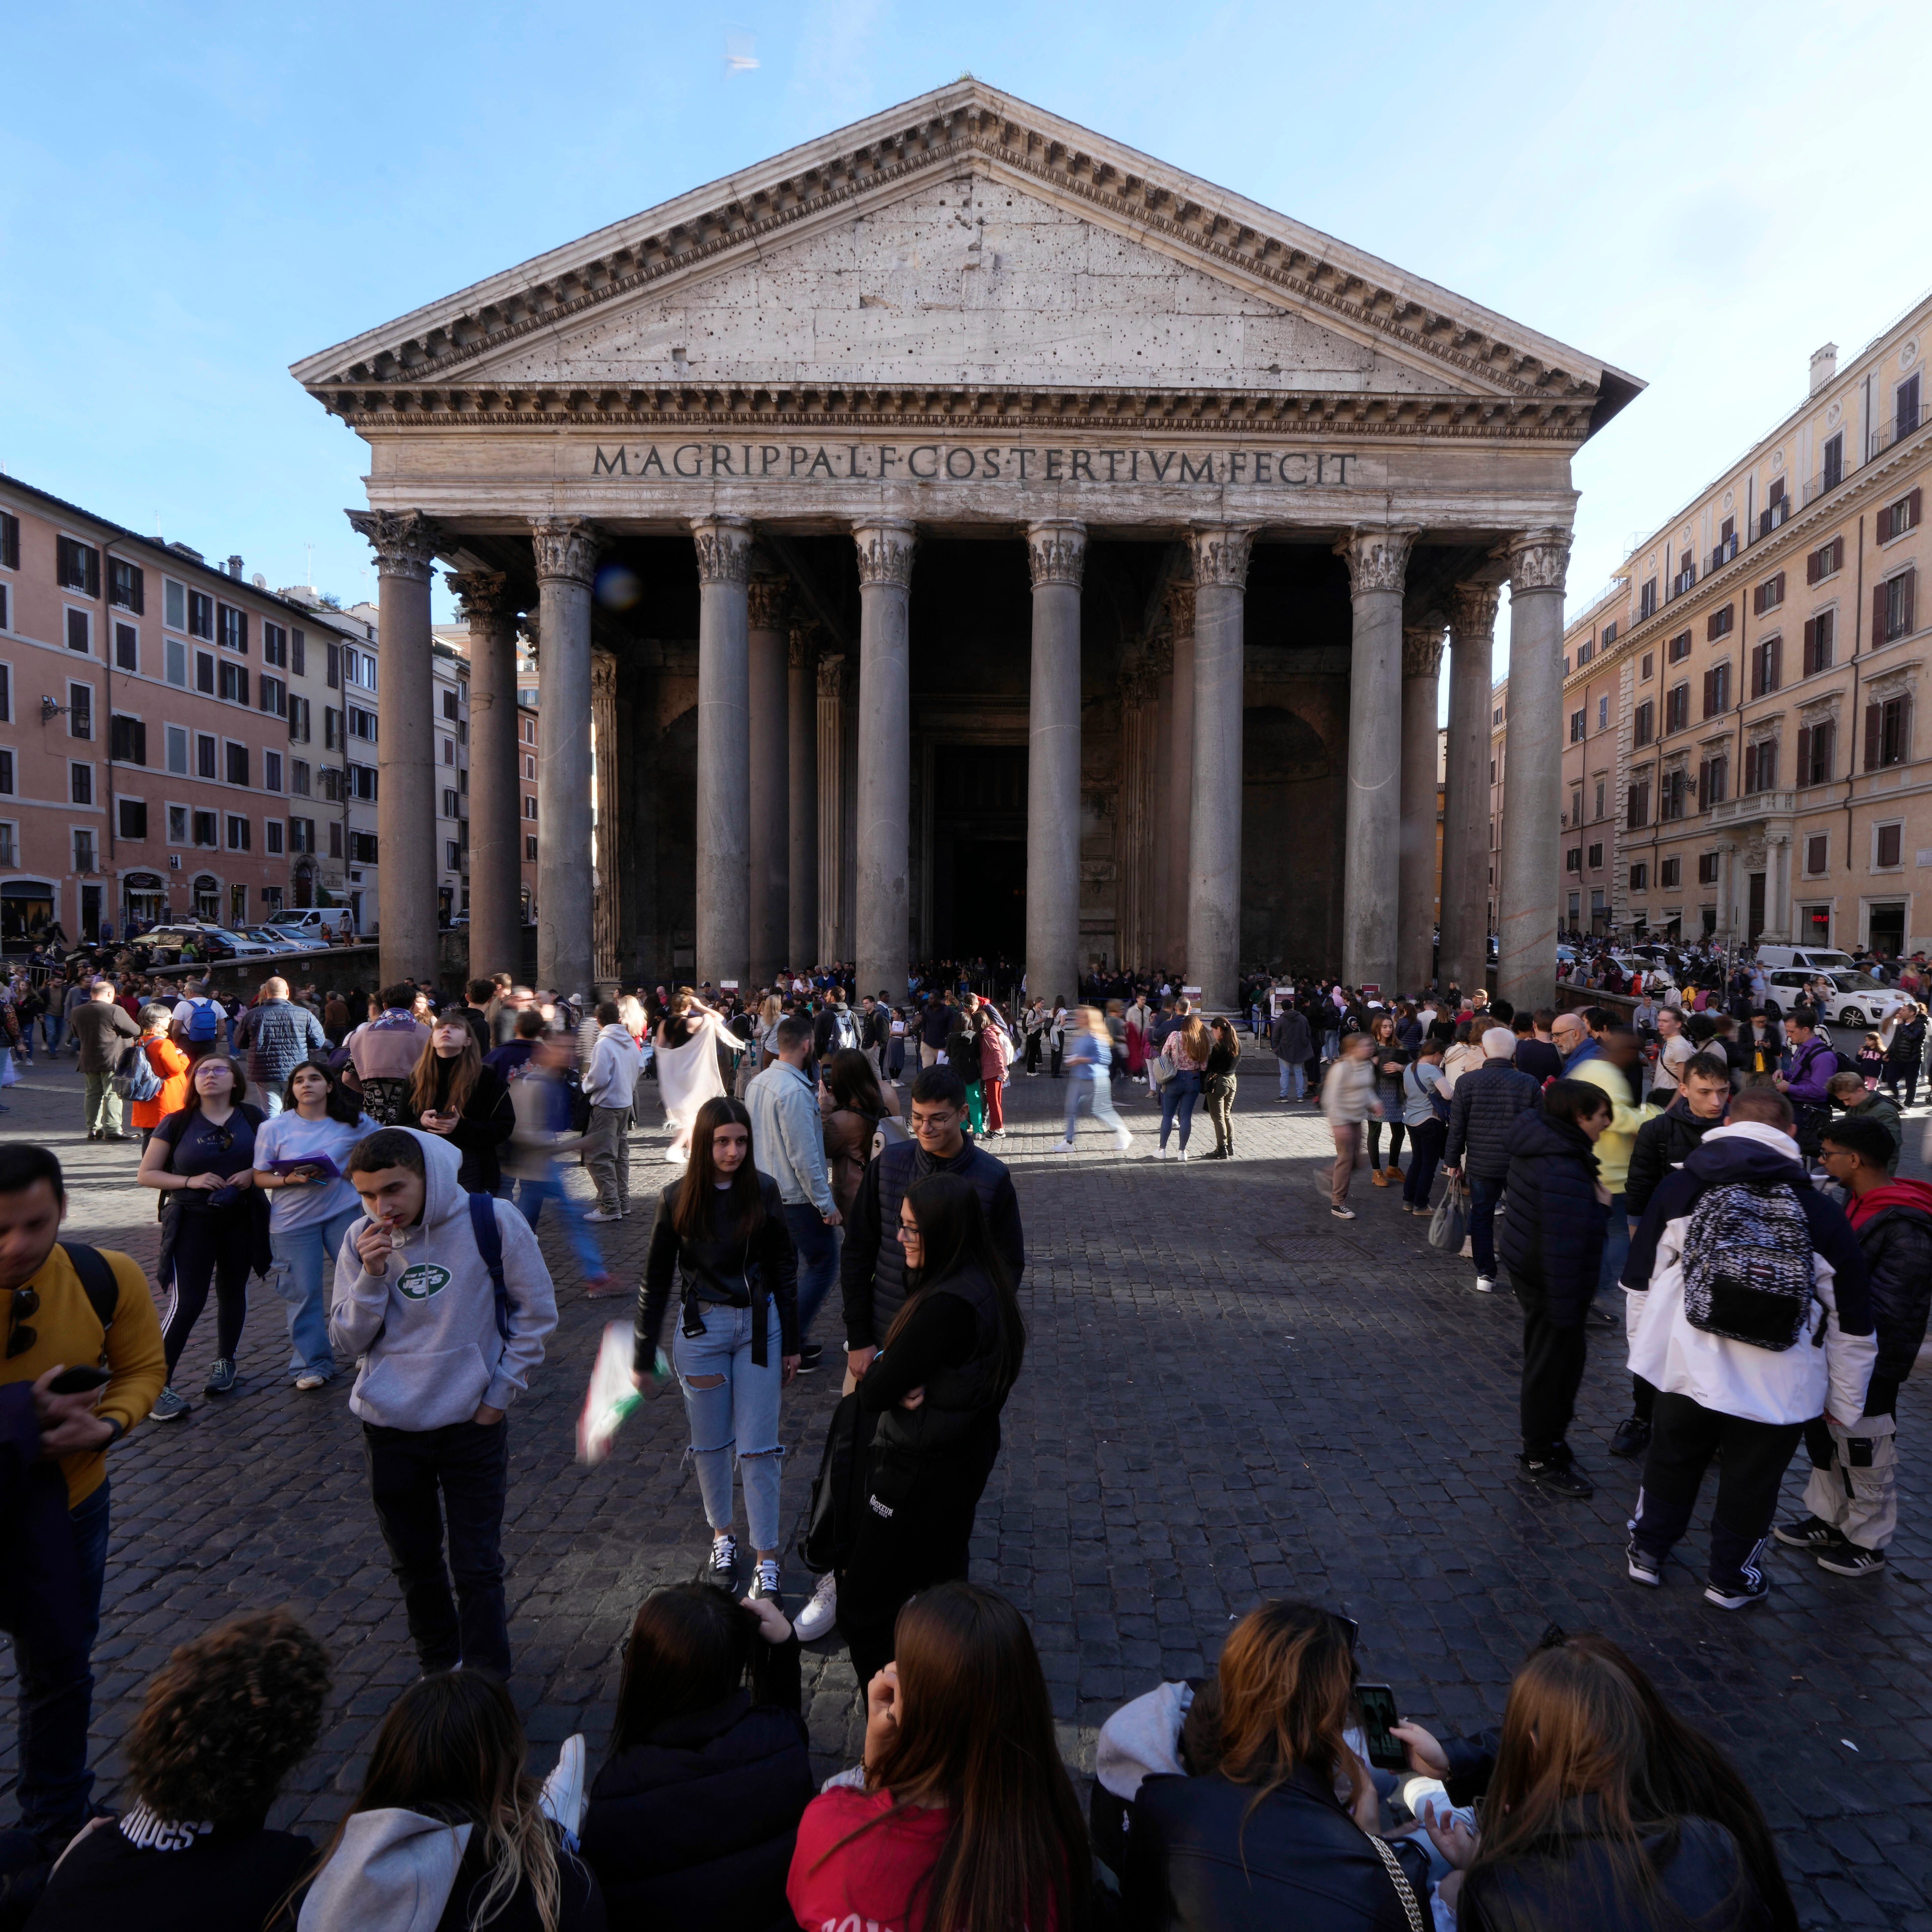 Tourists queue to visit Rome's Pantheon in Rome, Thursday, March 16, 2023. Visitors to Rome's Pantheon, Italy's most-visited cultural site, will soon be charged a 5-euros entrance fee under an agreement signed Thursday, March 16, 2023 by Italian culture and church officials.